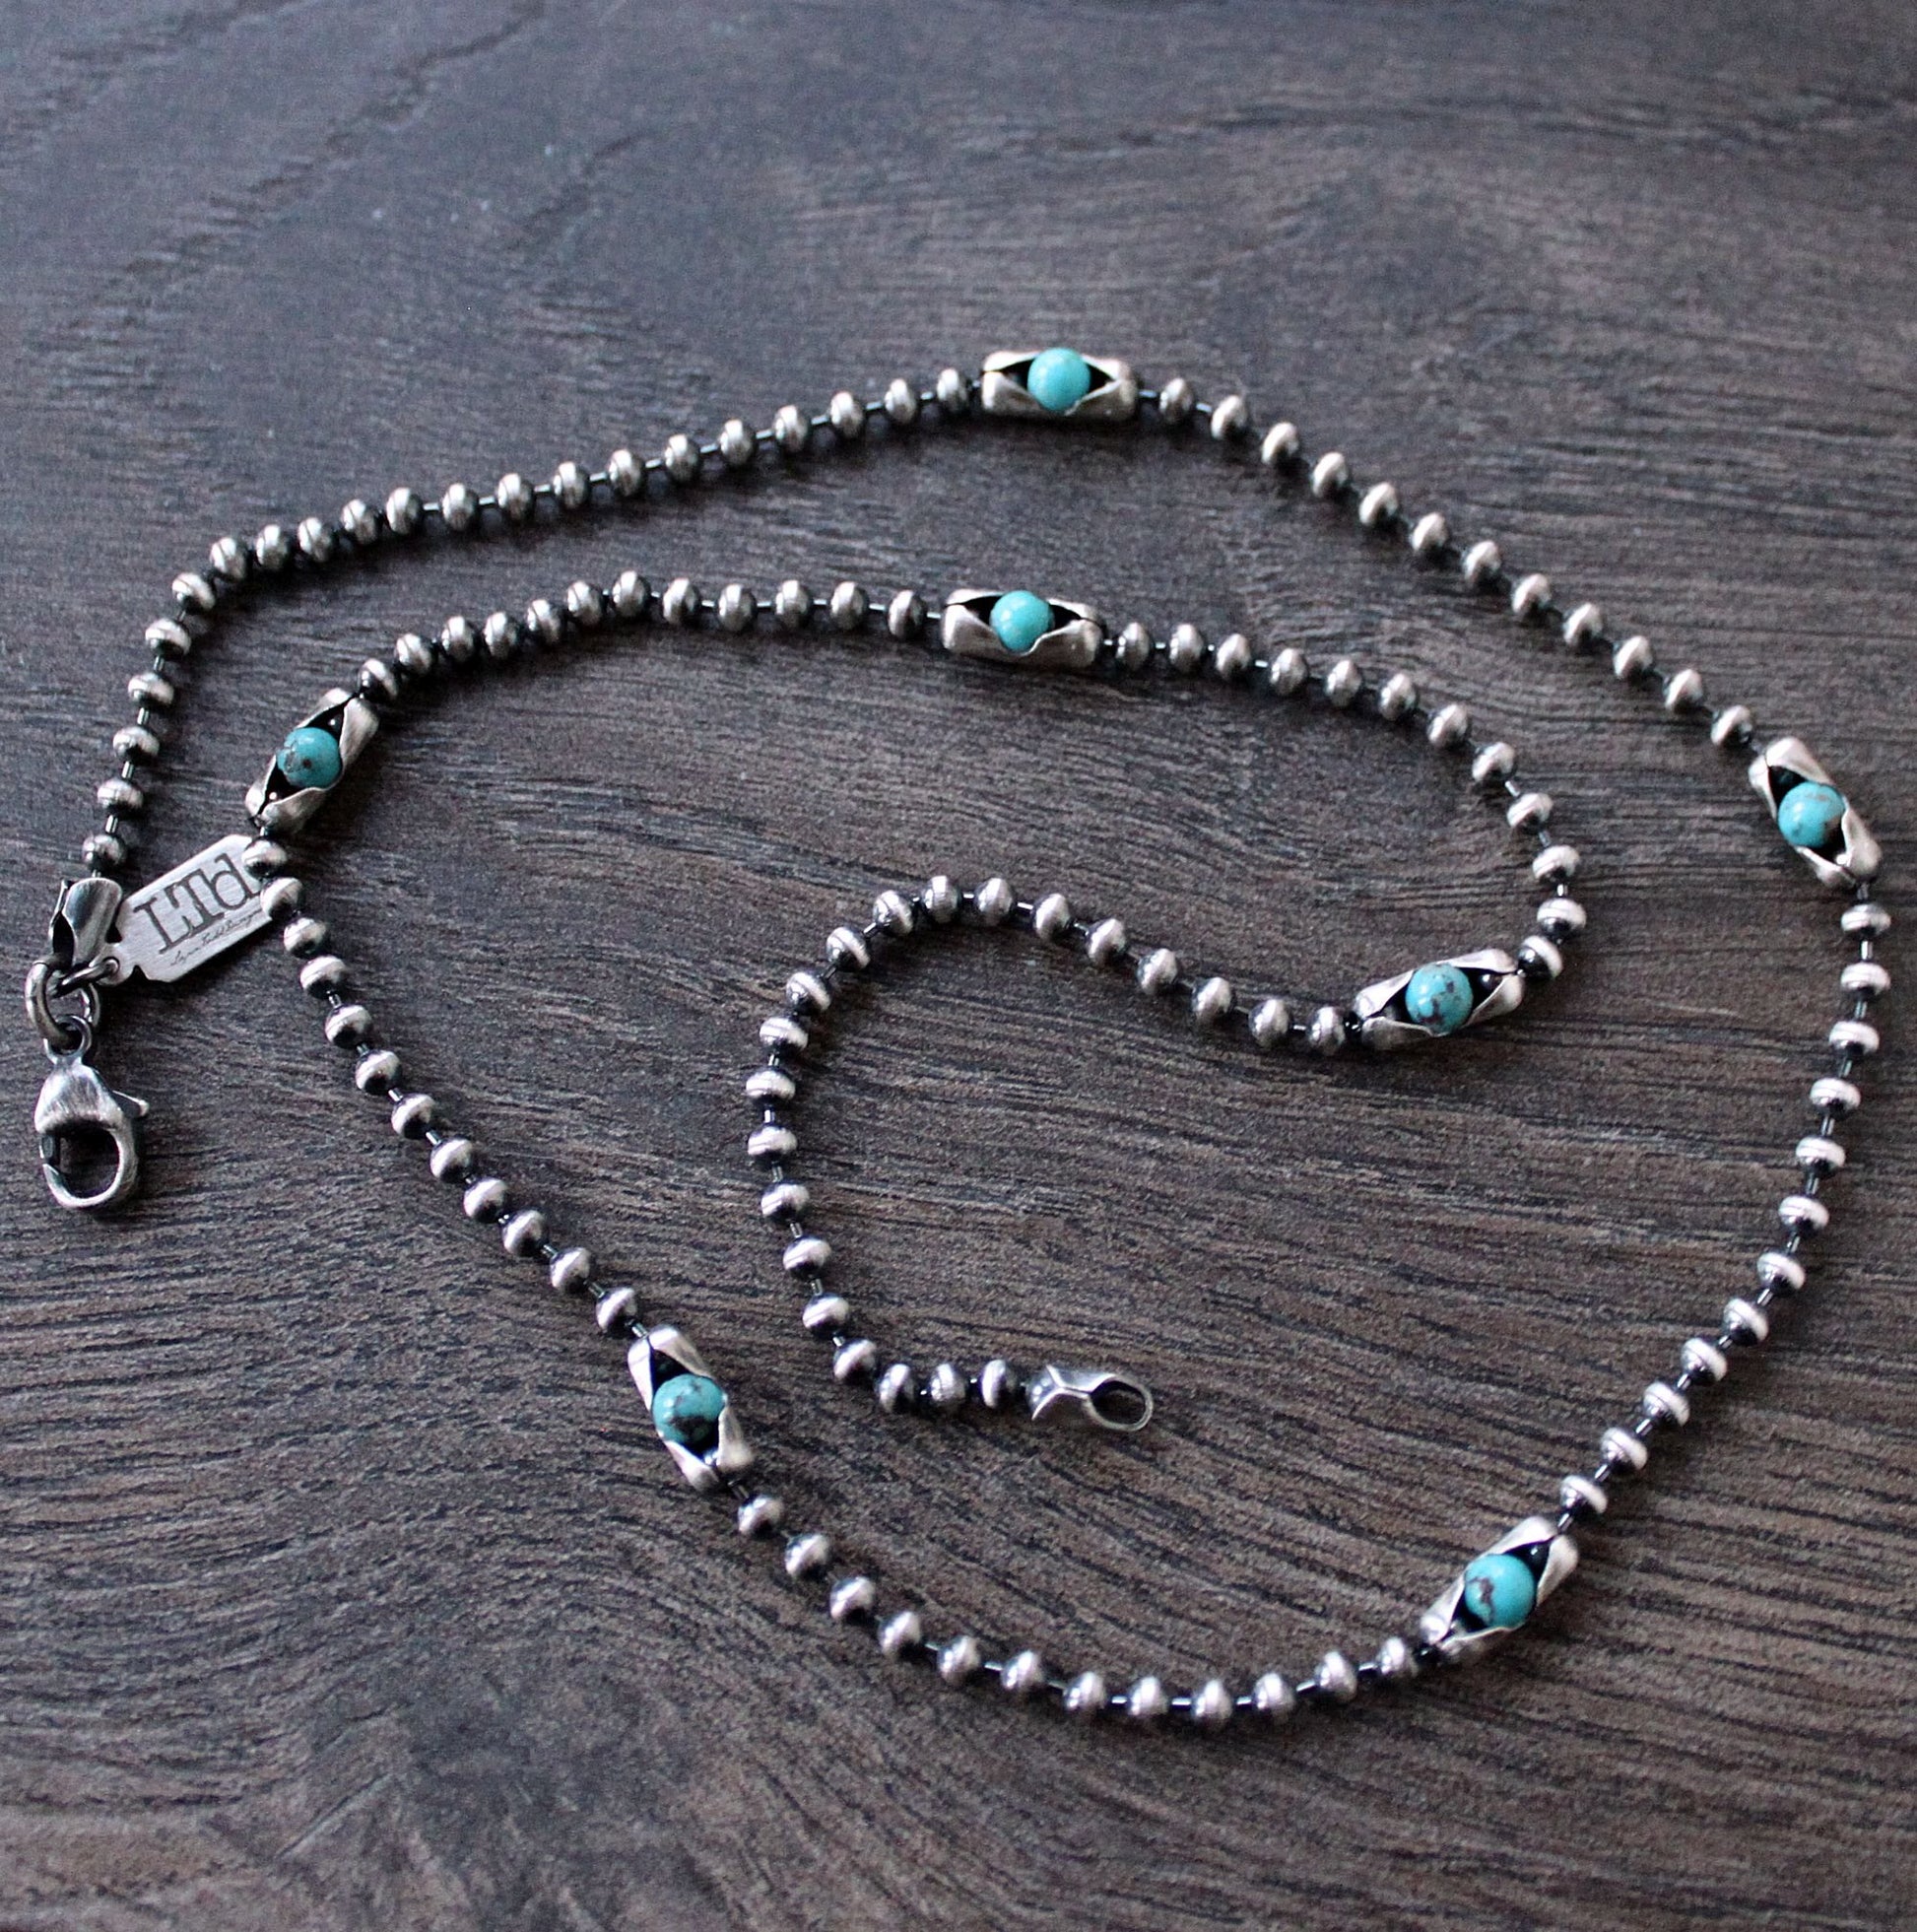 Men's Turquoise Stone Silver Ball Chain Necklace 24 Inches